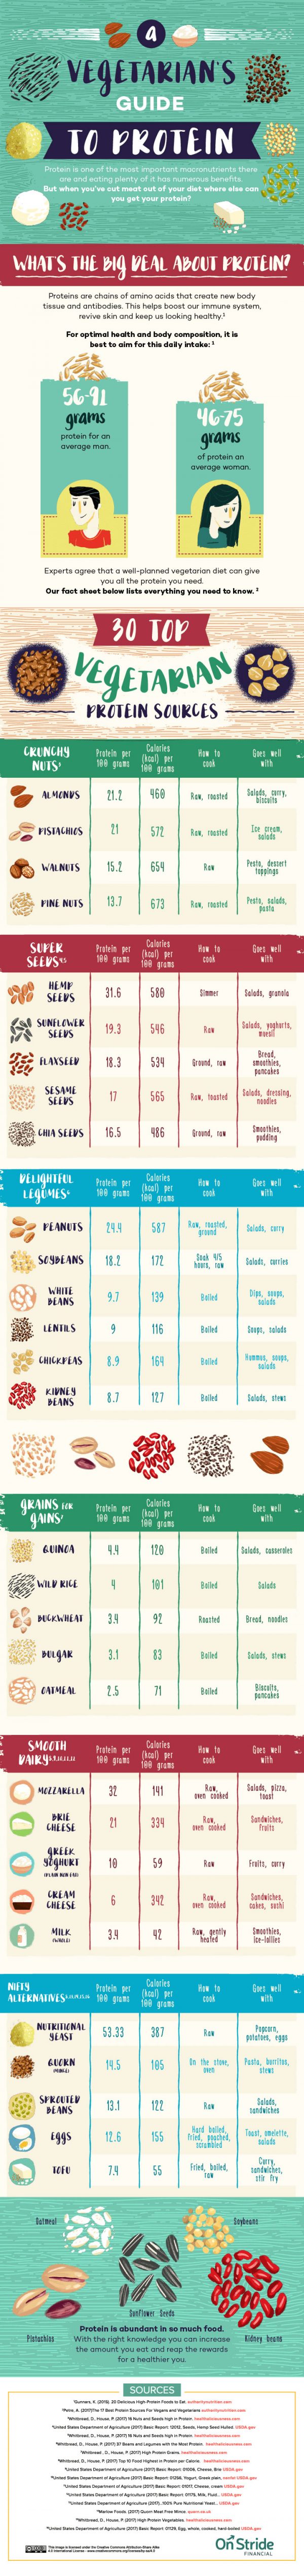 Vegetarian’s Guide to Protein [Infographic] - Best Infographics